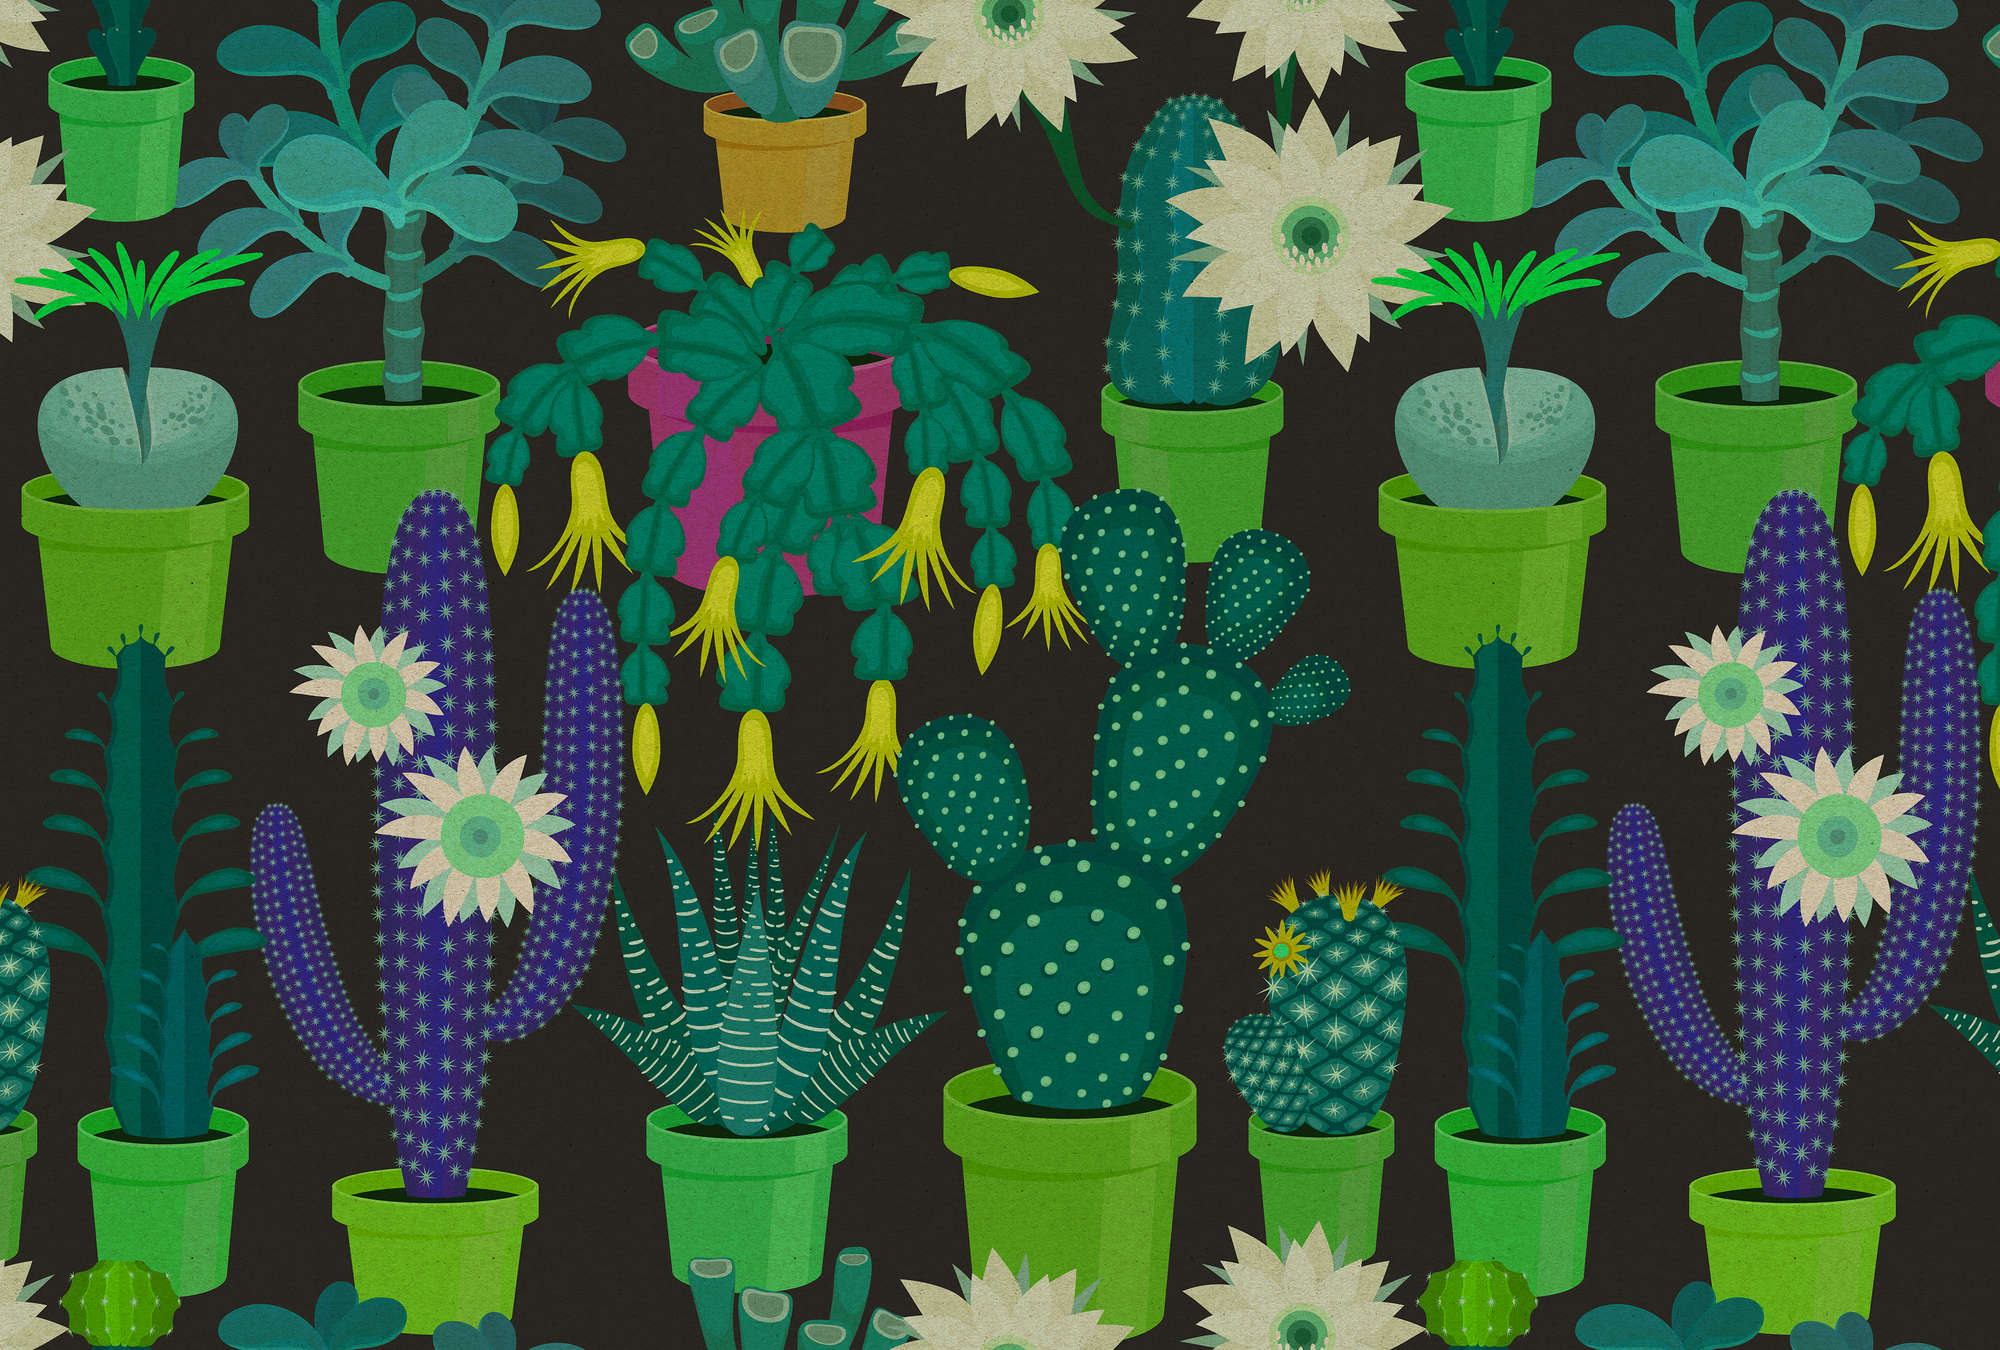             Cactus garden 2 - Photo wallpaper with colourful cacti in comic style in cardboard structure - Green, Black | Pearl smooth fleece
        